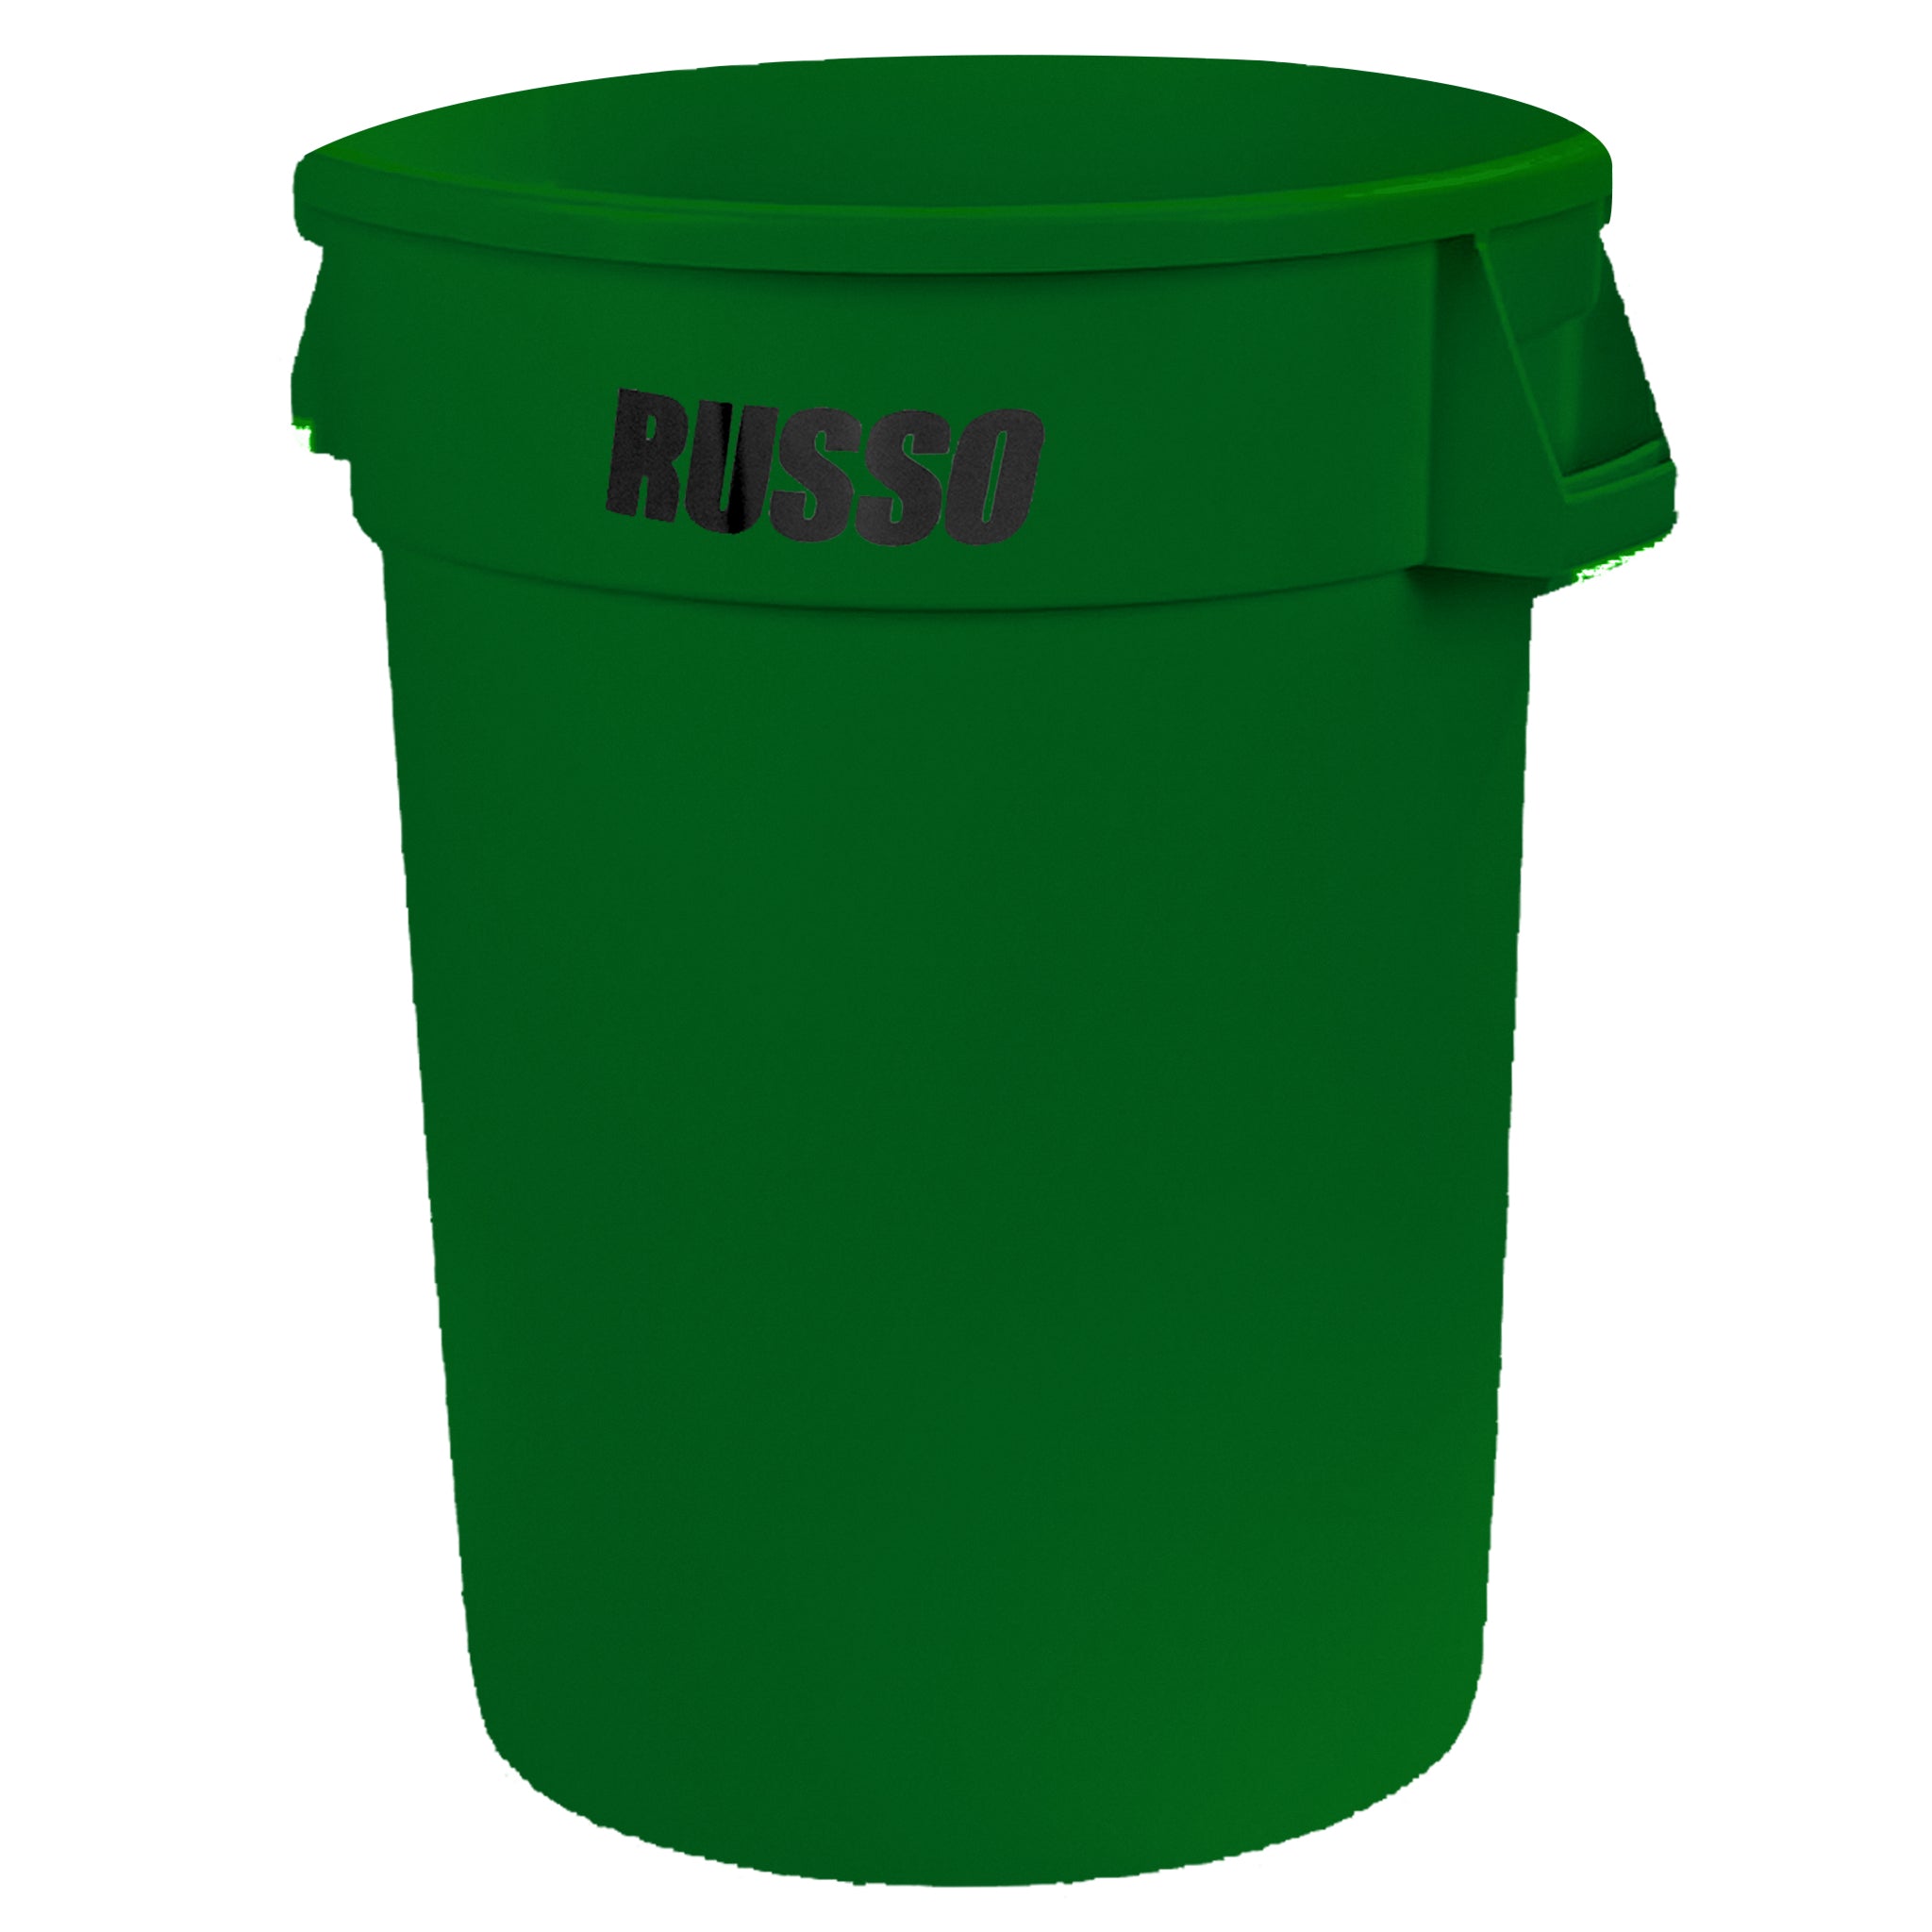 RUSSO Glow Garbage Can 44 Gallon - Green